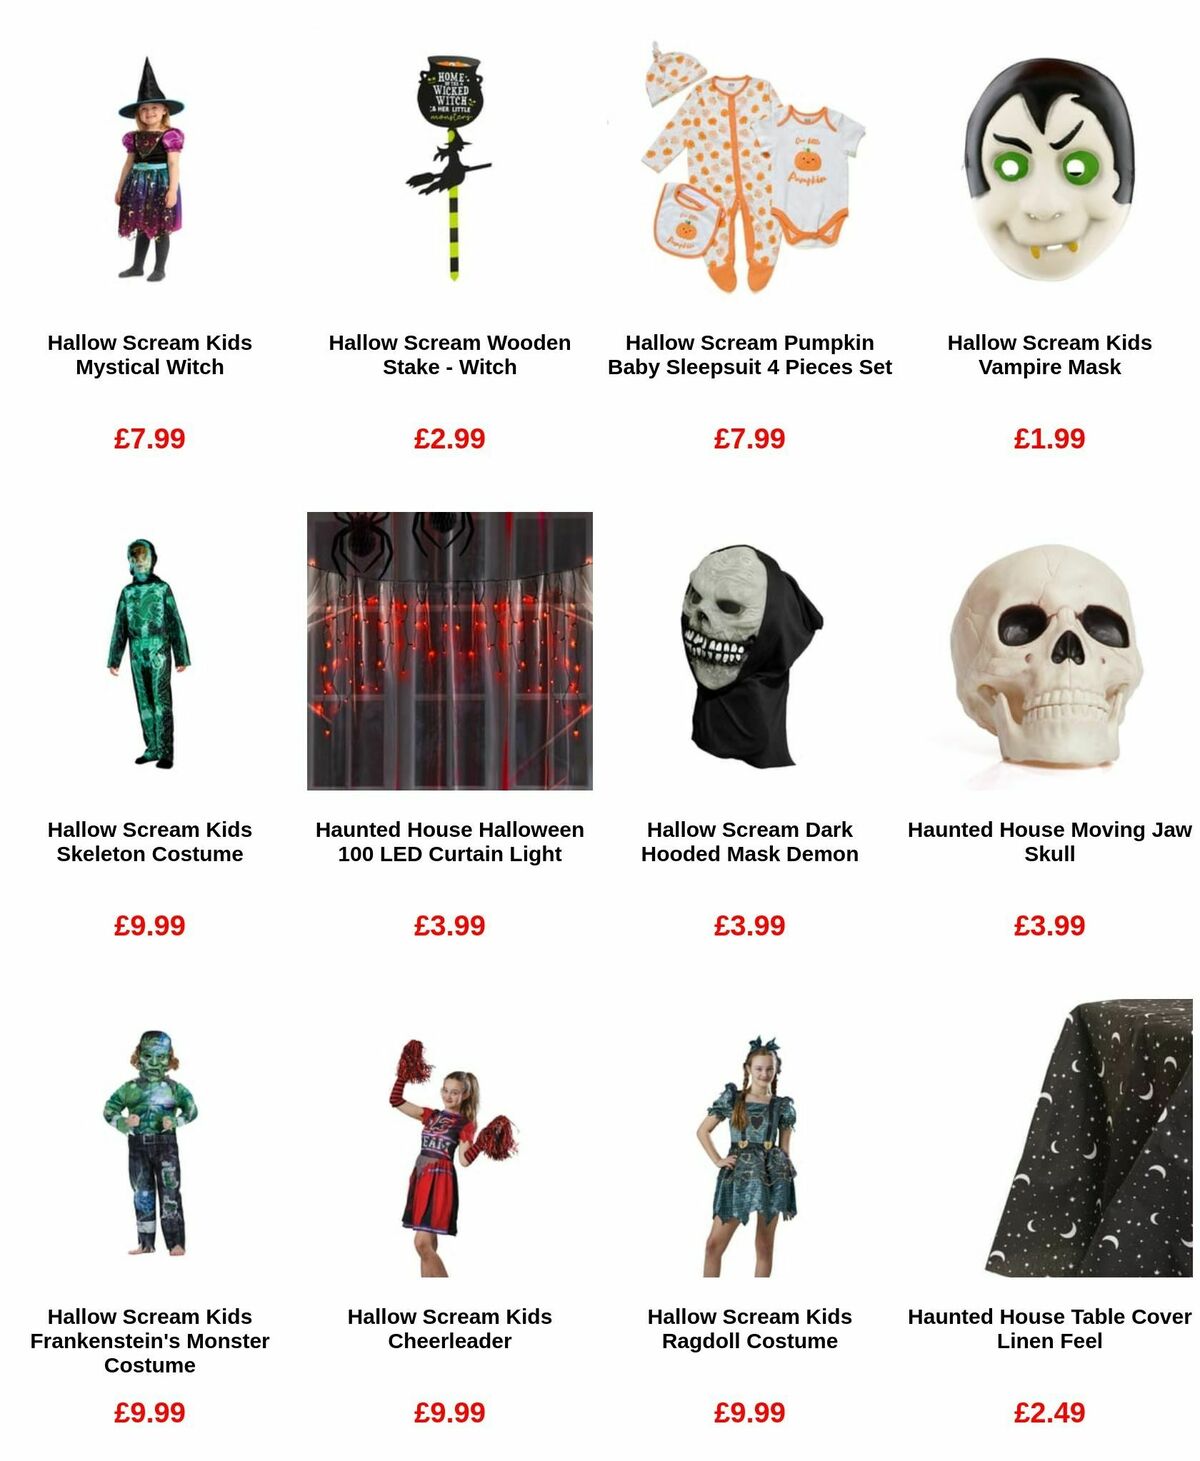 Home Bargains Halloween Offers from 5 September